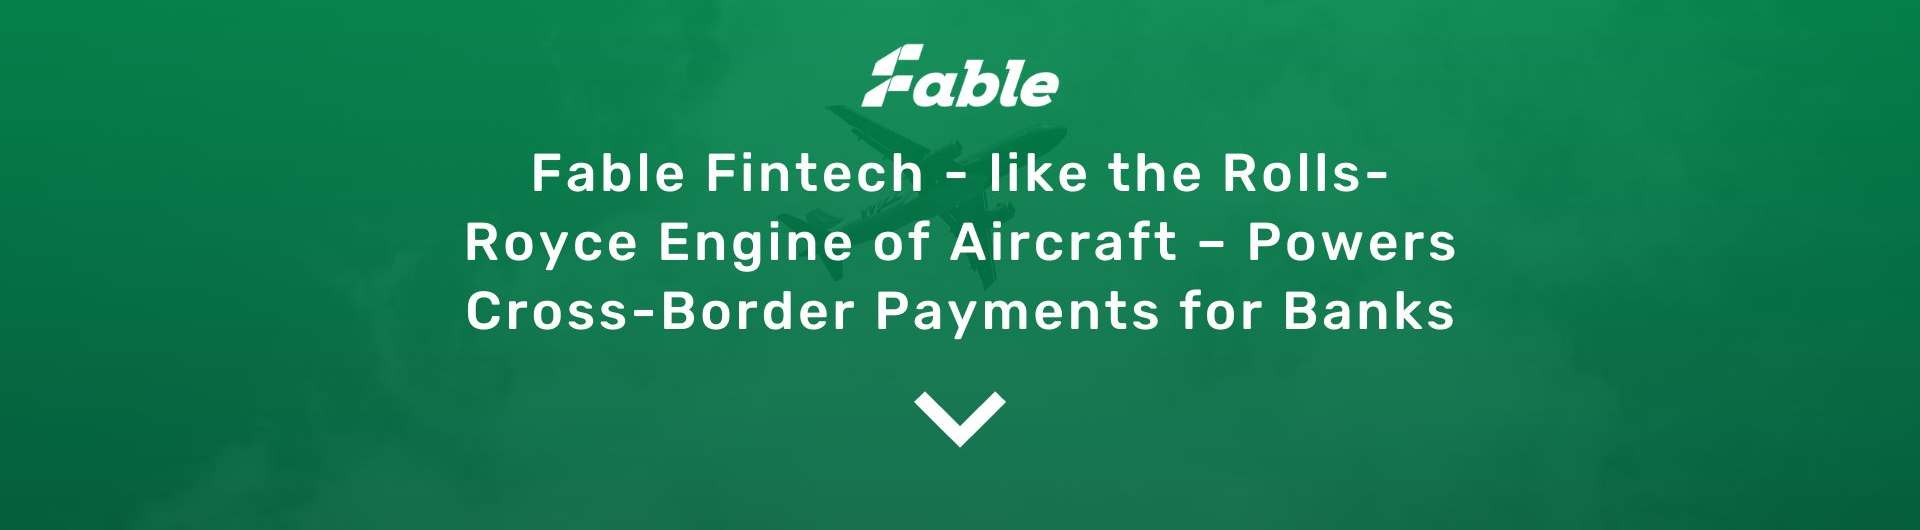 Fable Fintech like the Rolls-Royce Engine of Aircraft Powers Cross-Border Payments for Banks